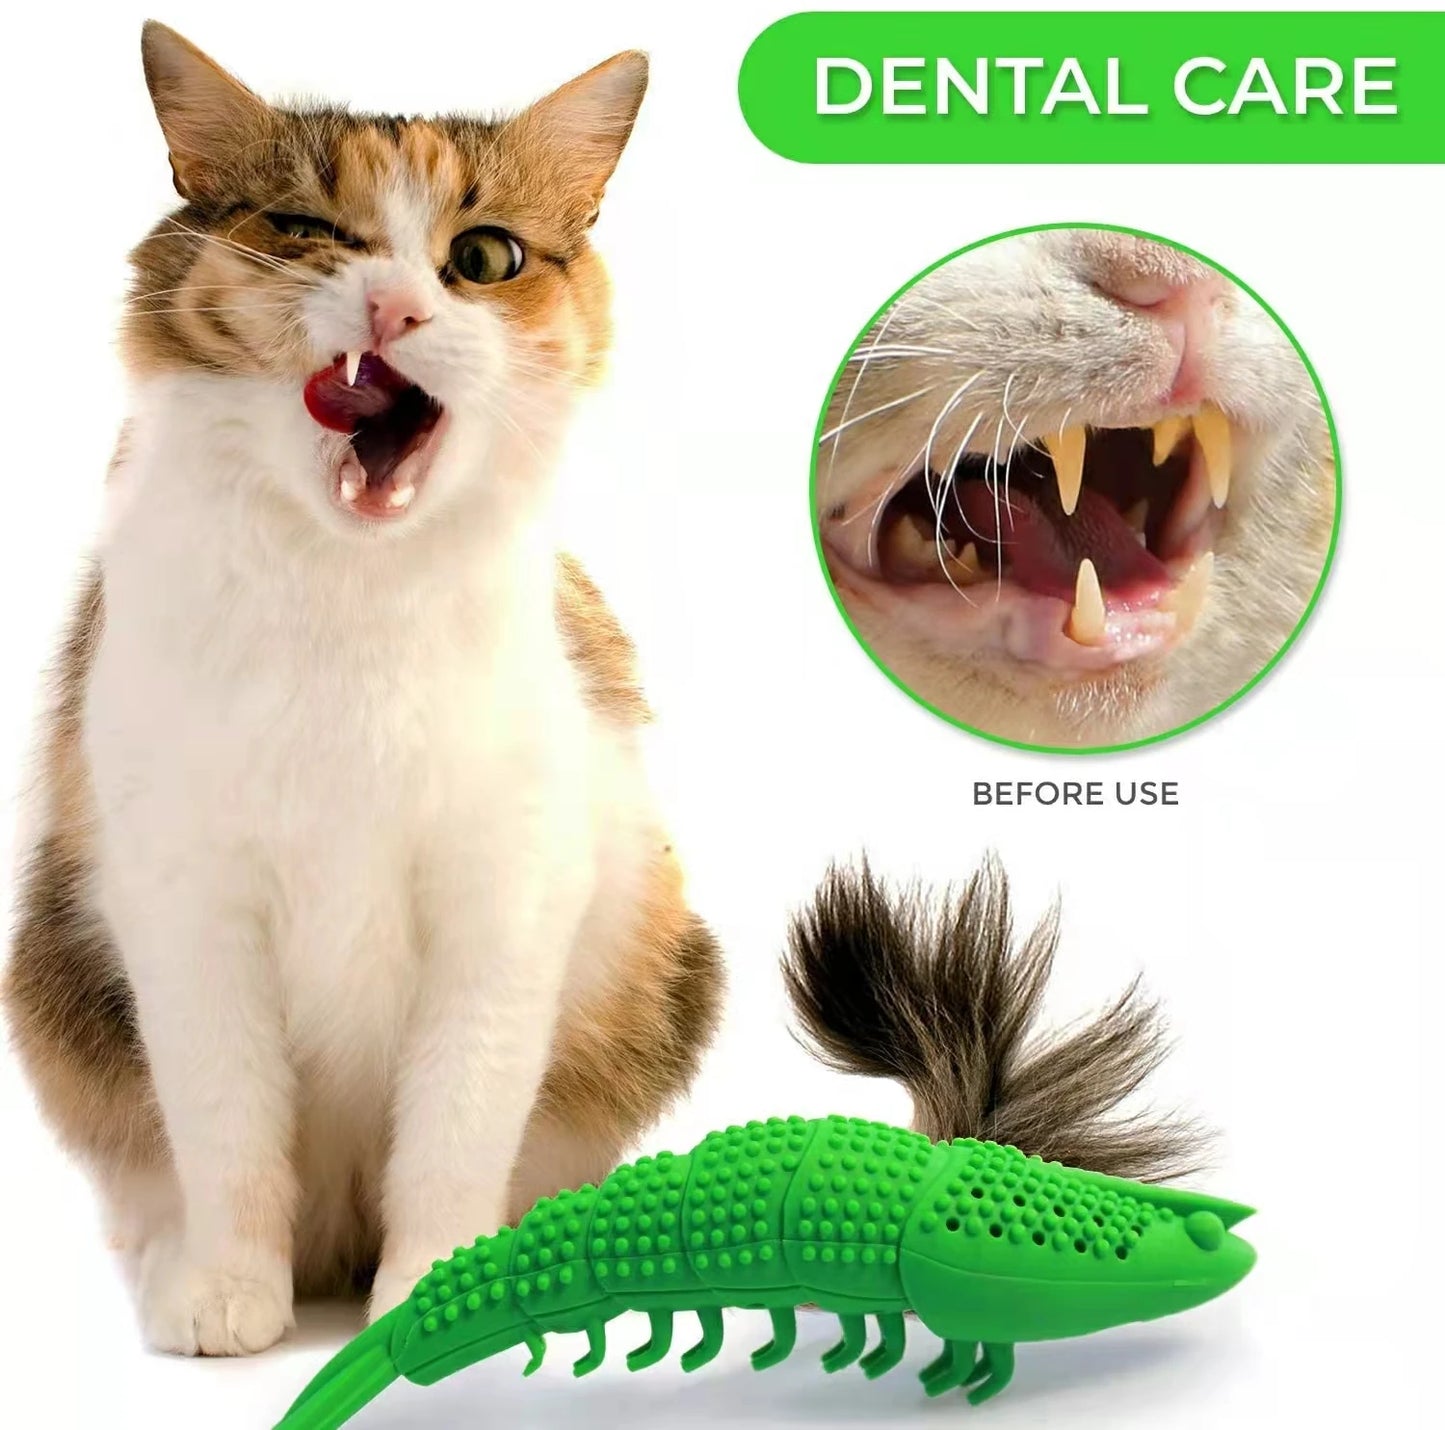 New Catnip Toys for Cats 360 Degree Teeth Cleaning Accessories Pet Toy Interactive Games Rubber Toothbursh Chew Pet Cat Supplies